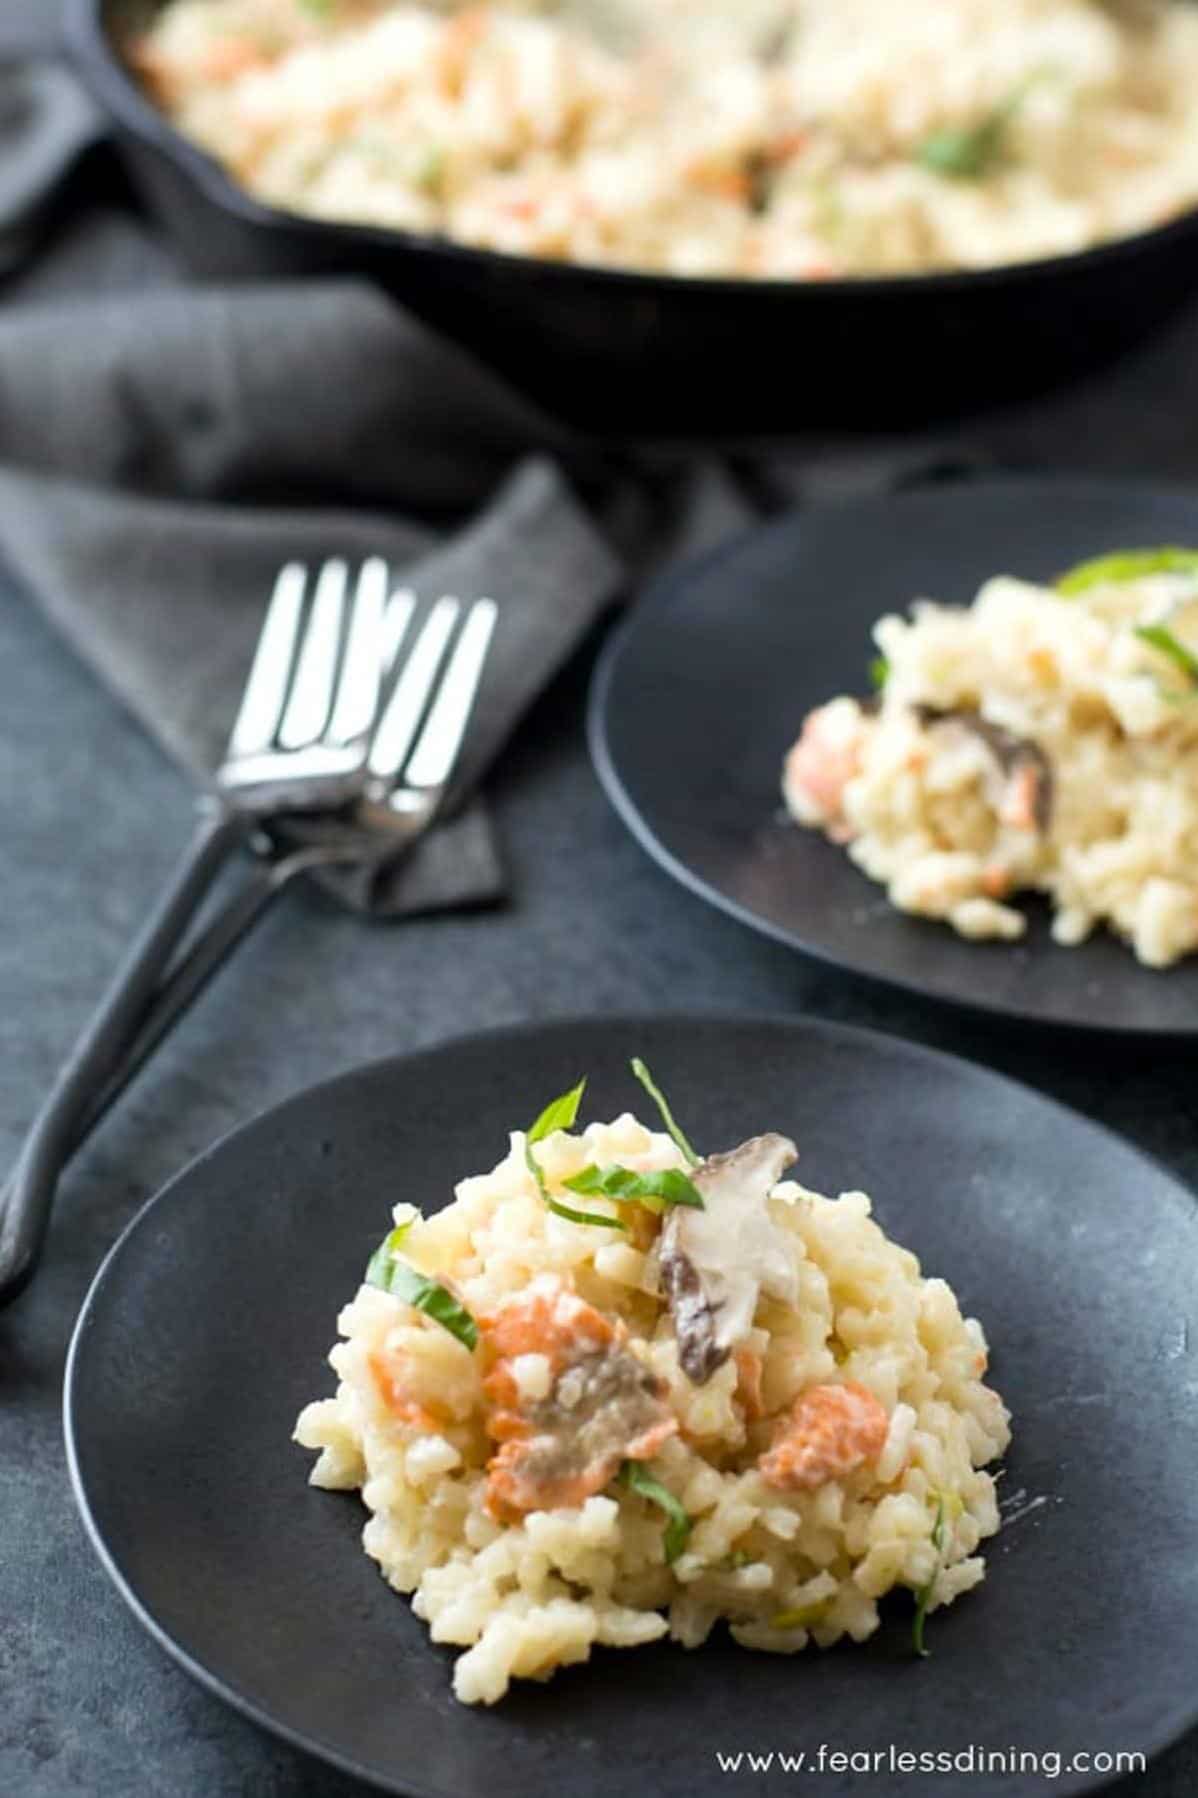  The rice cooker makes this recipe a breeze.